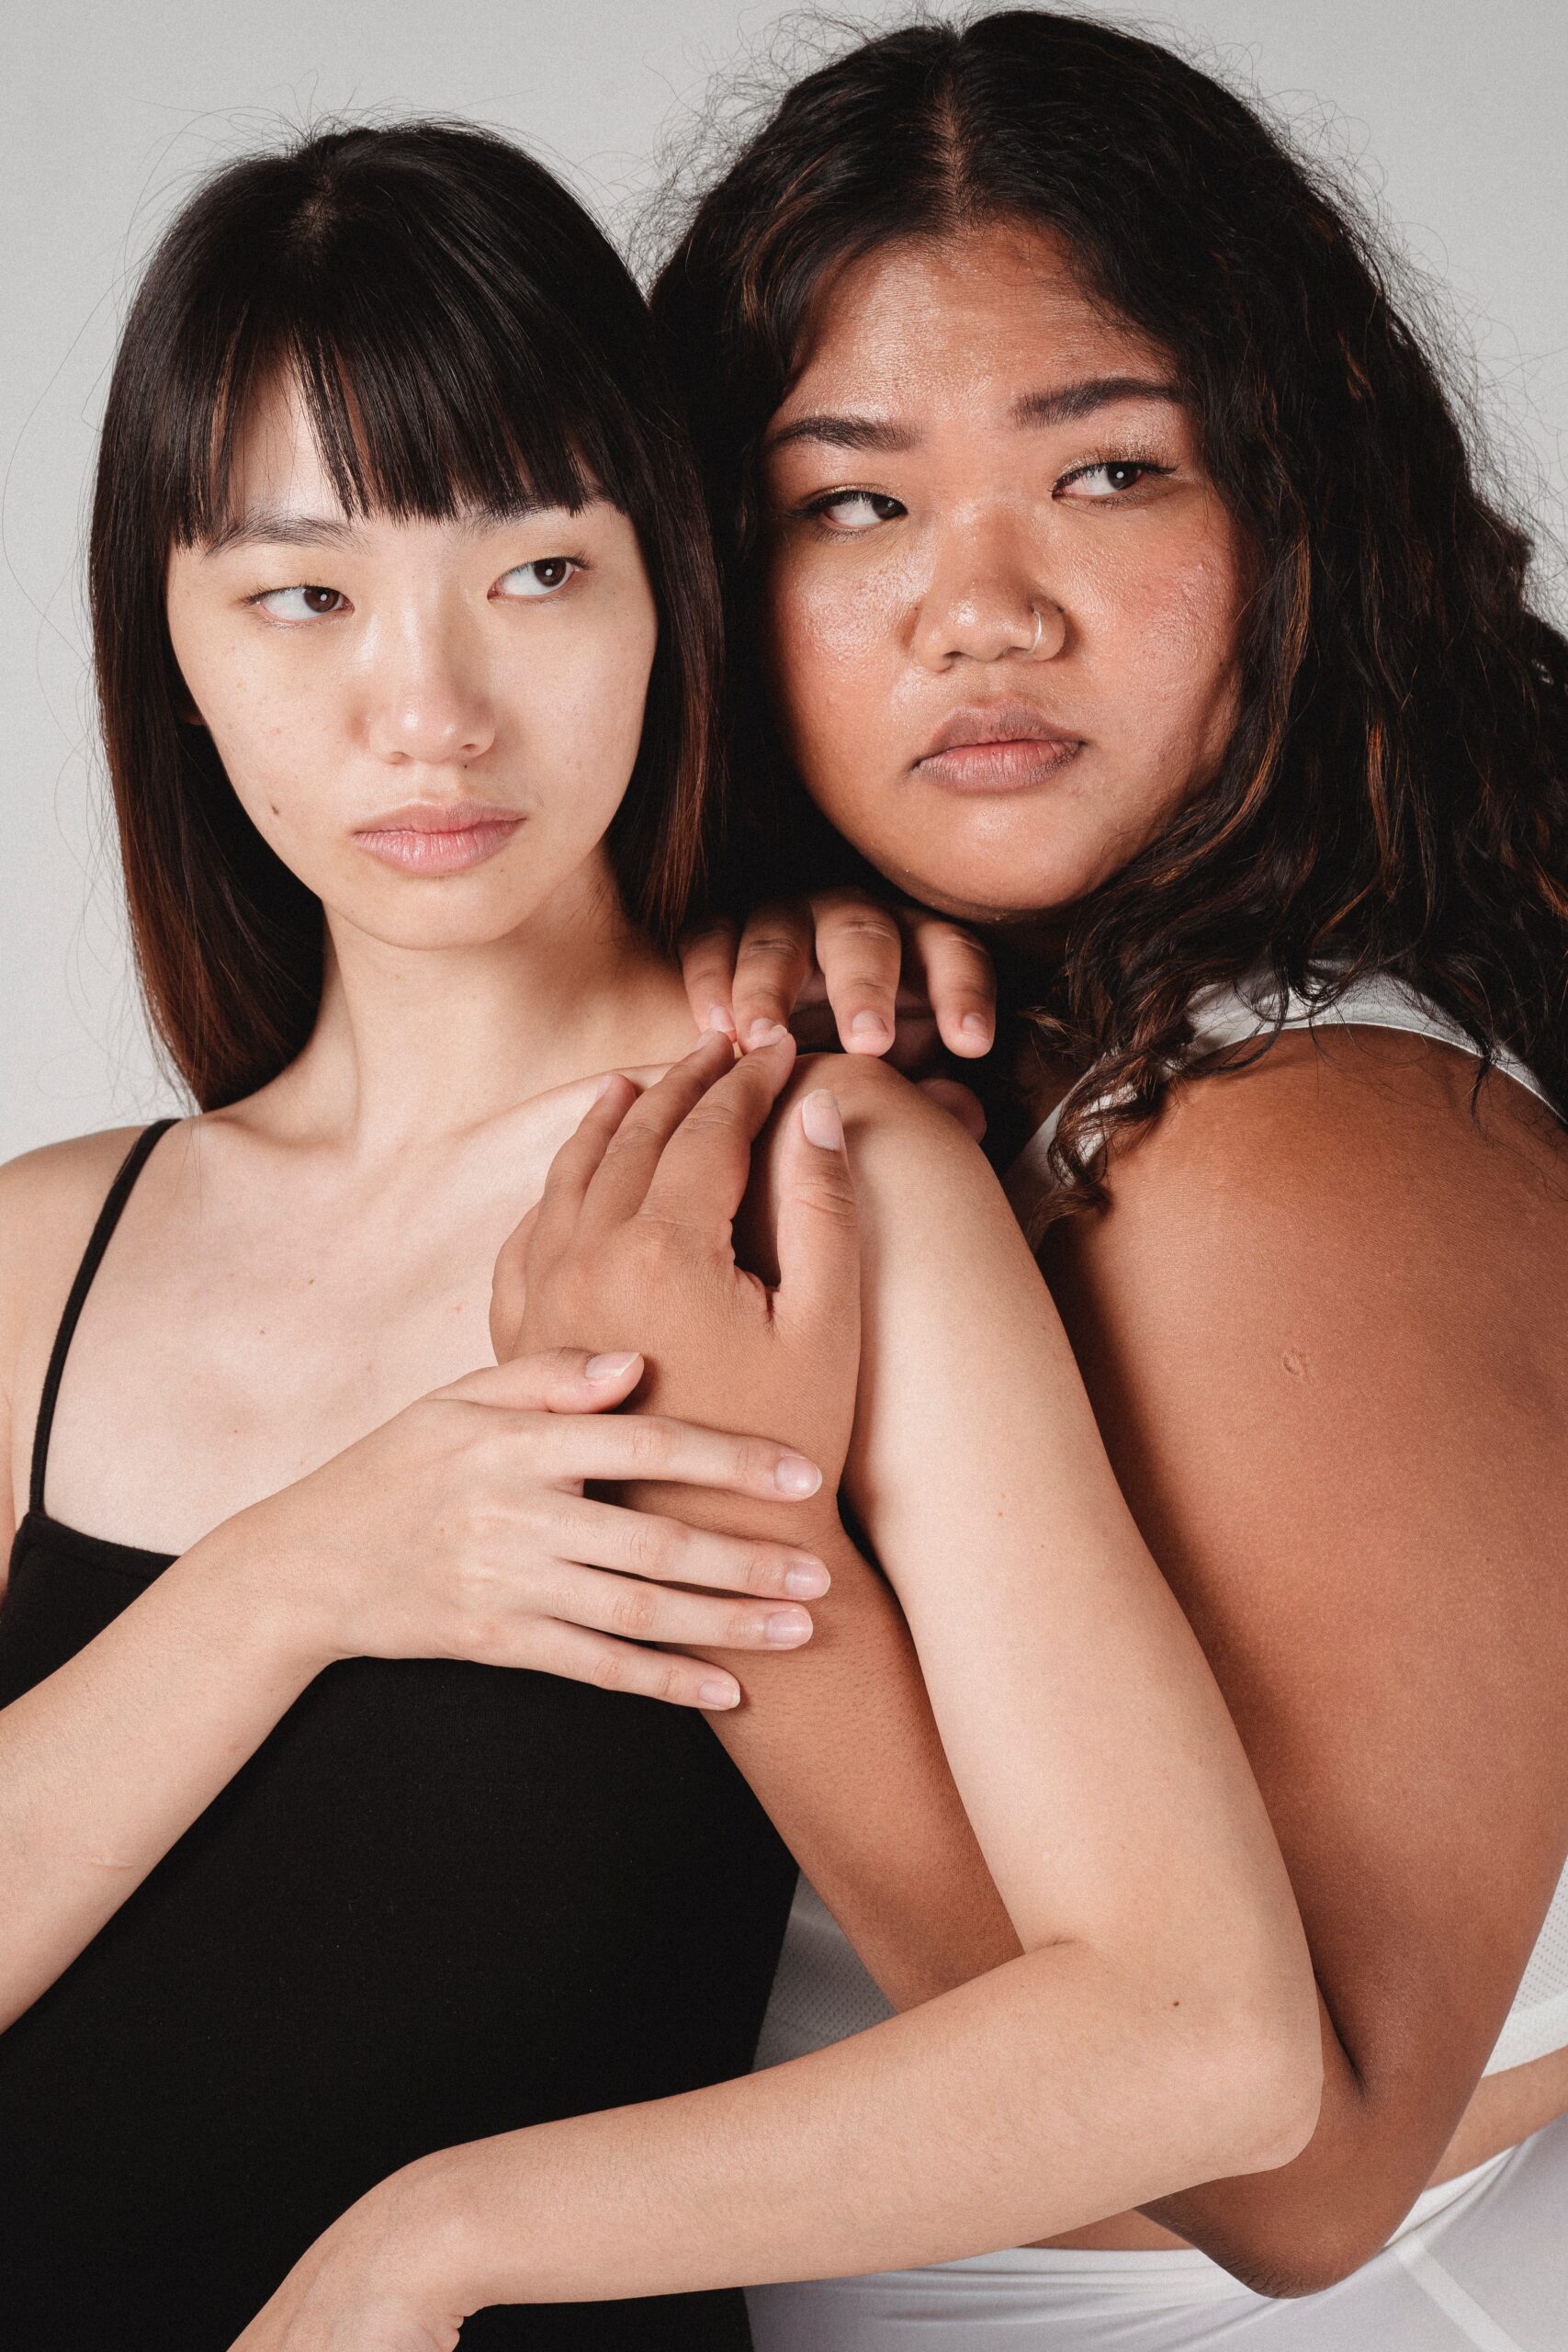 A female Asian and Pacific Islander couple